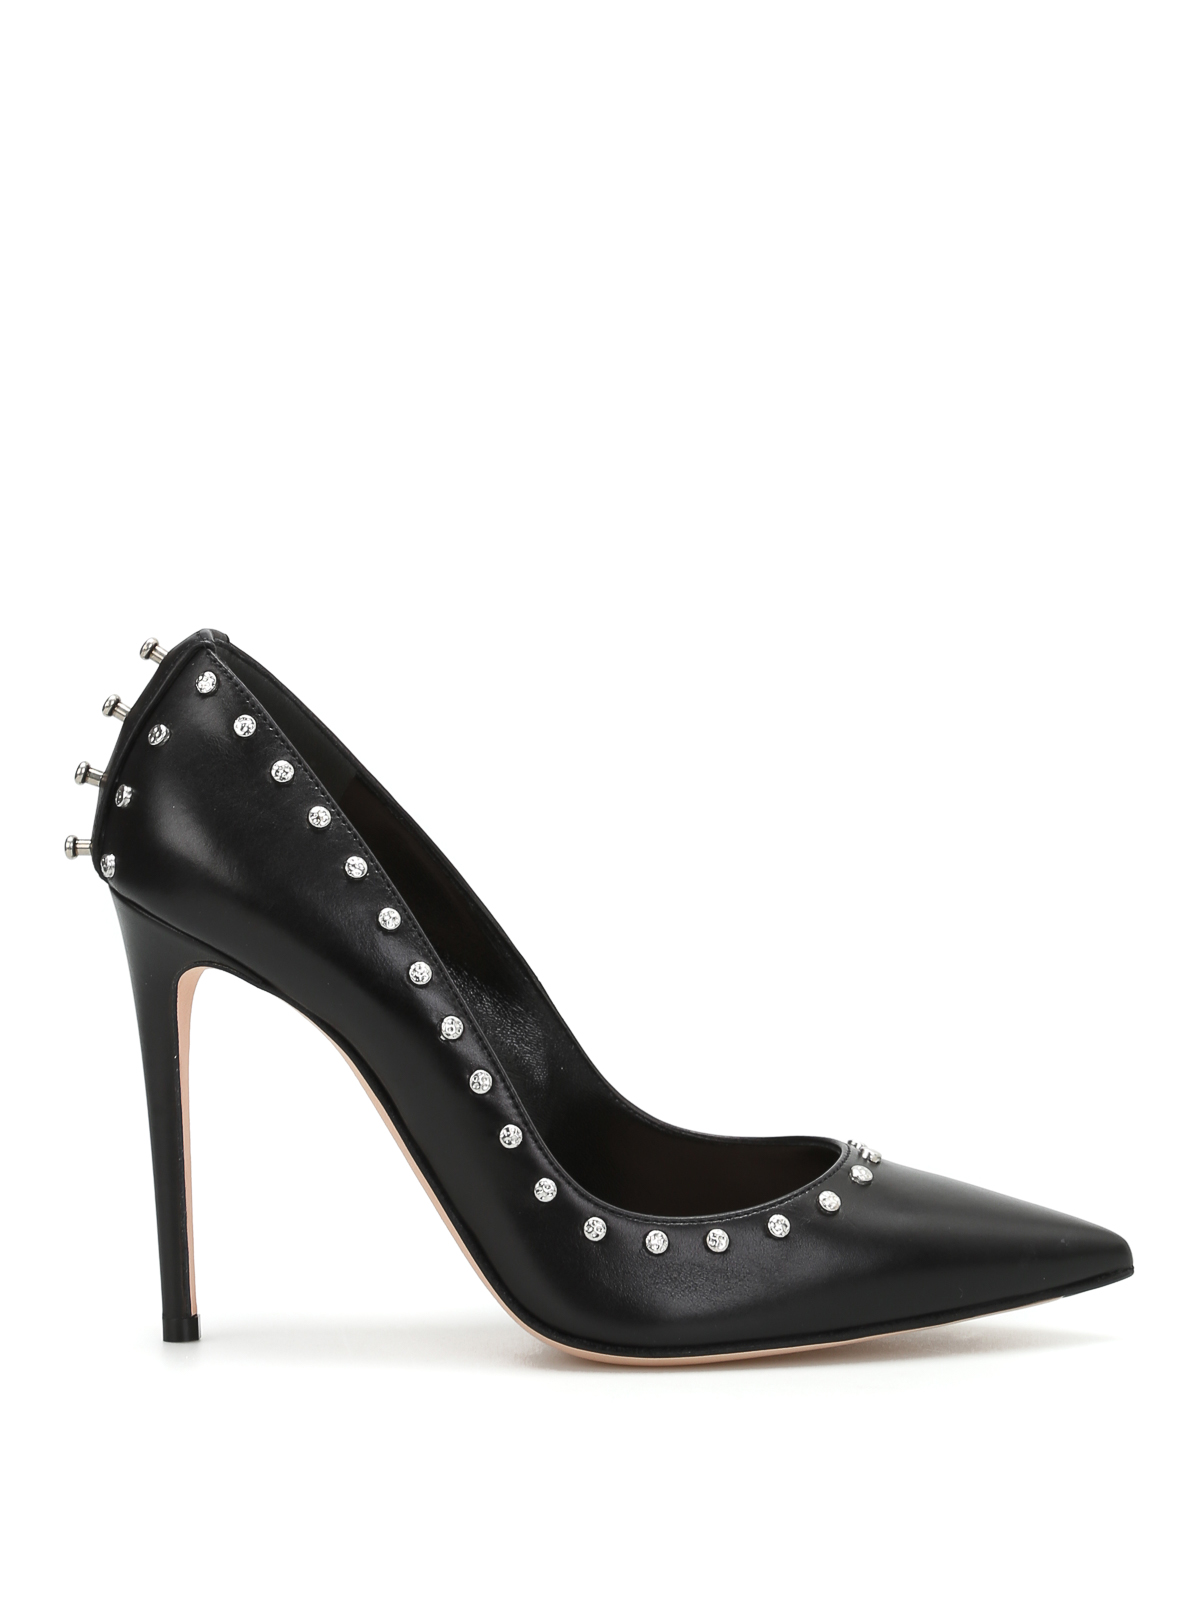 Court shoes Alexander Mcqueen - Studded leather pumps - 470571WHMU01000